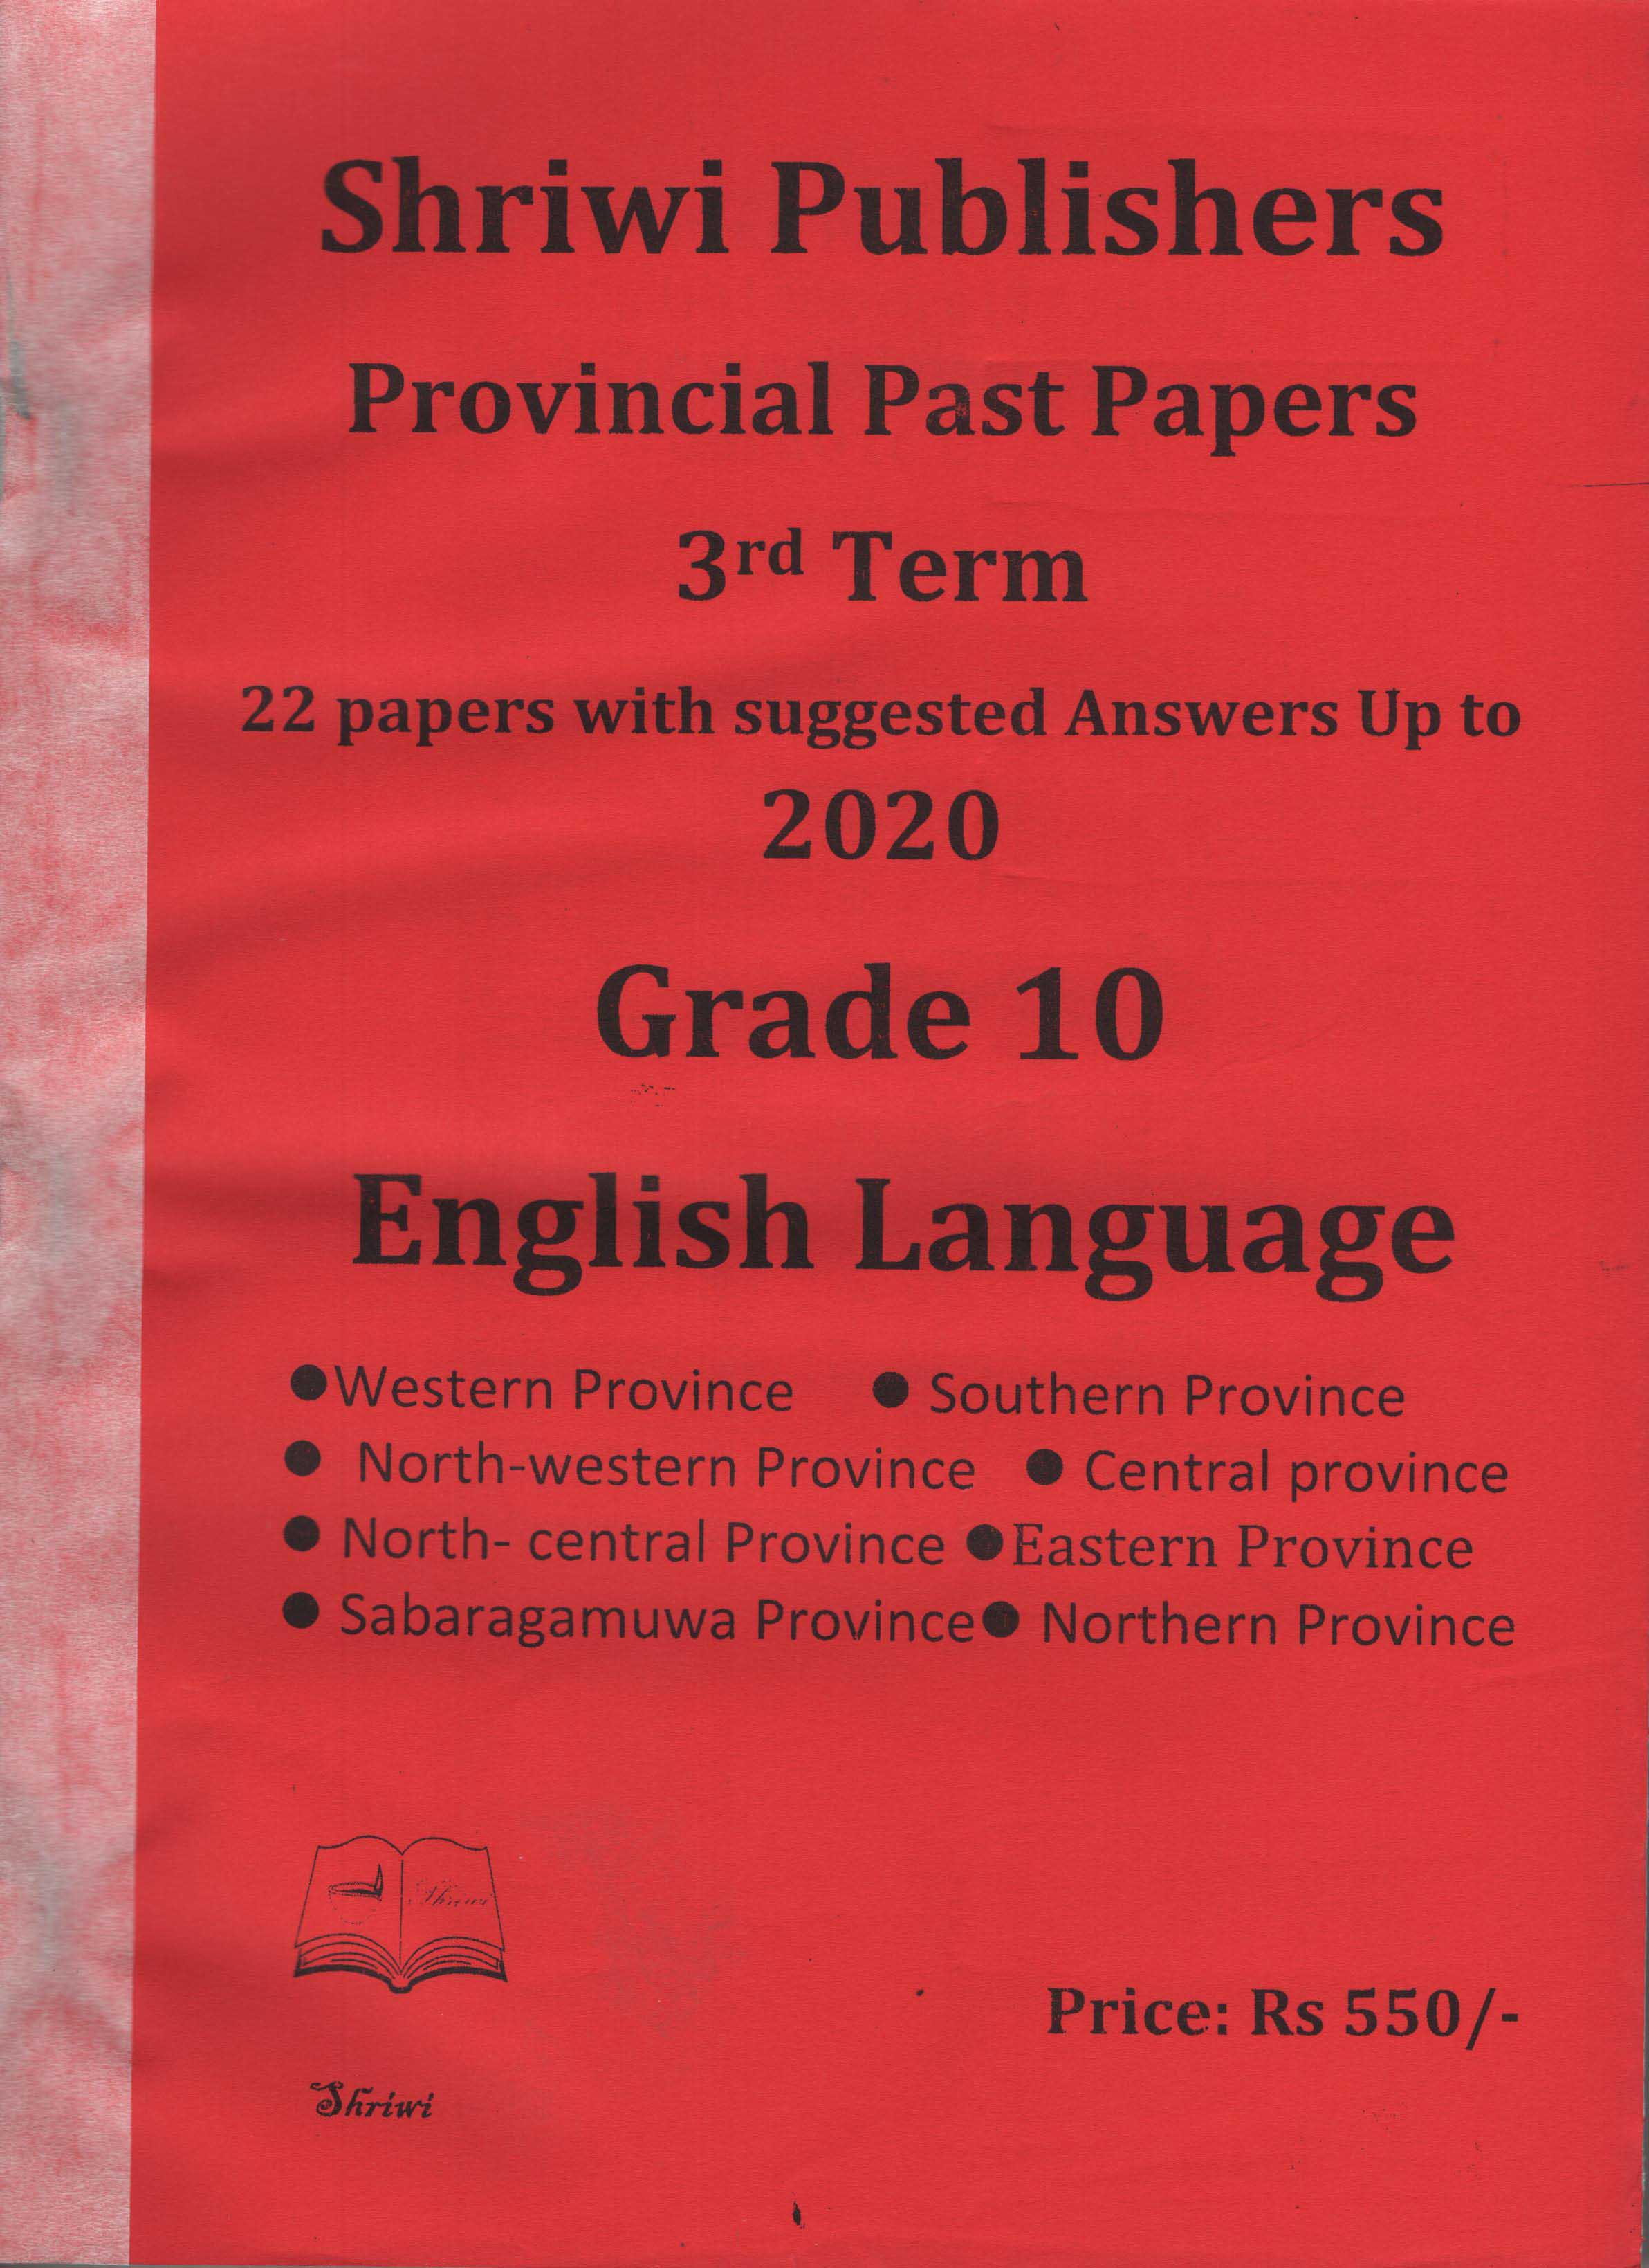 Shriwi Grade 10 English Language Provincial Past Papers up to 2020 with Suggested Answers 3rdTerms